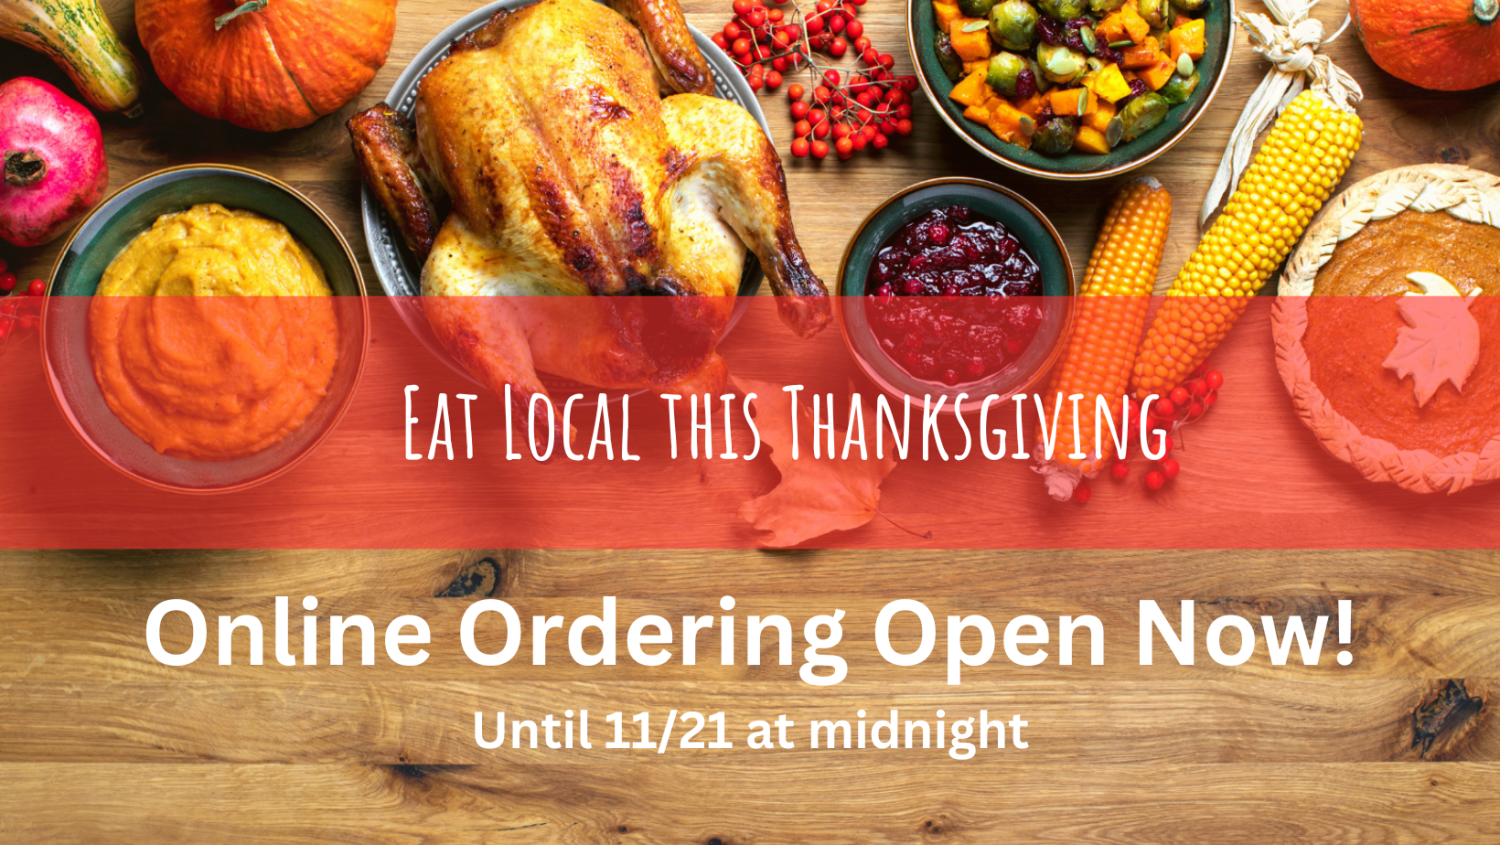 Previous Happening: Order from the FarmStand for Thanksgiving!